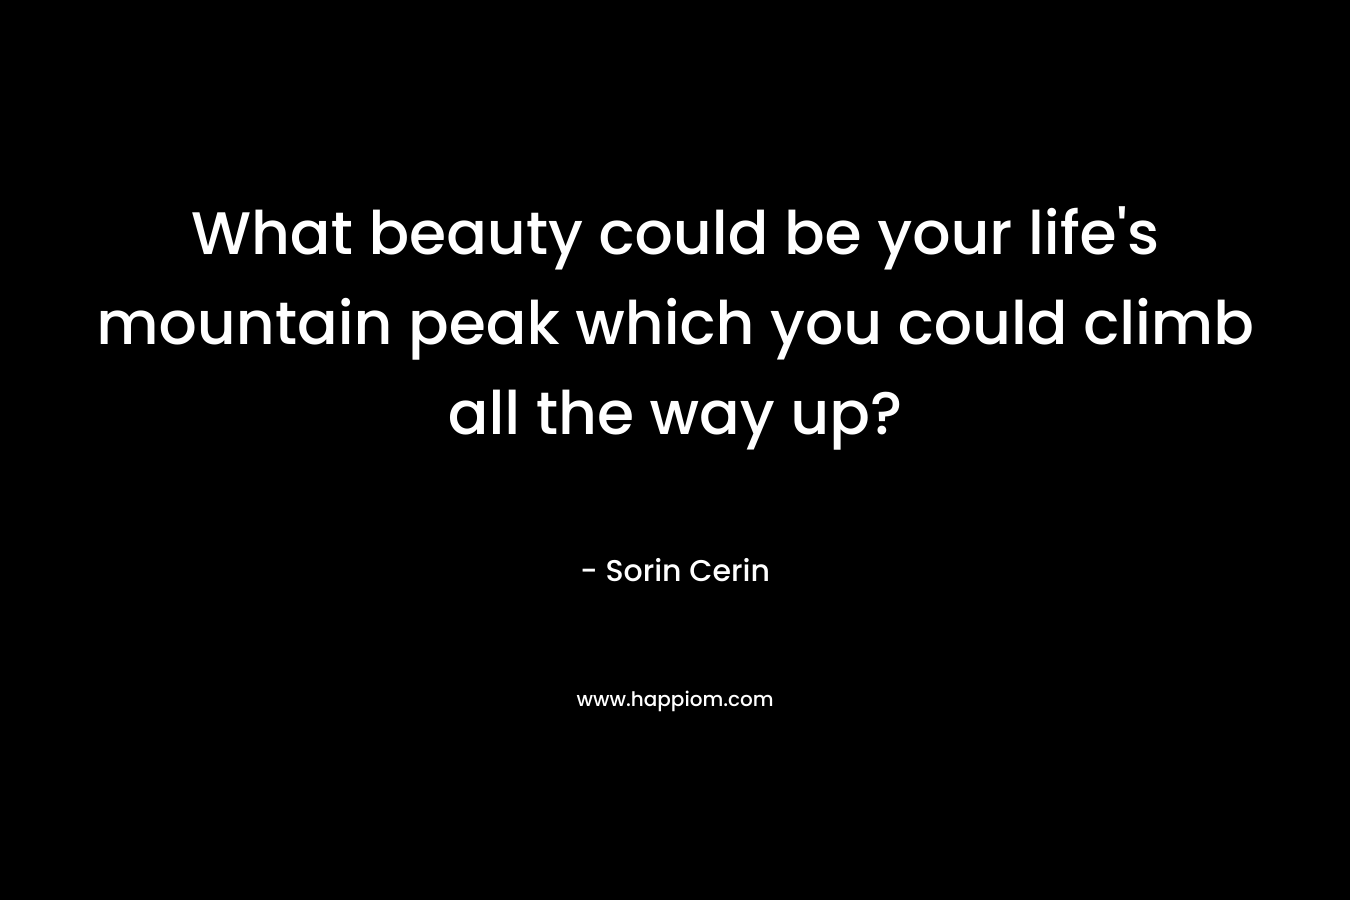 What beauty could be your life's mountain peak which you could climb all the way up?